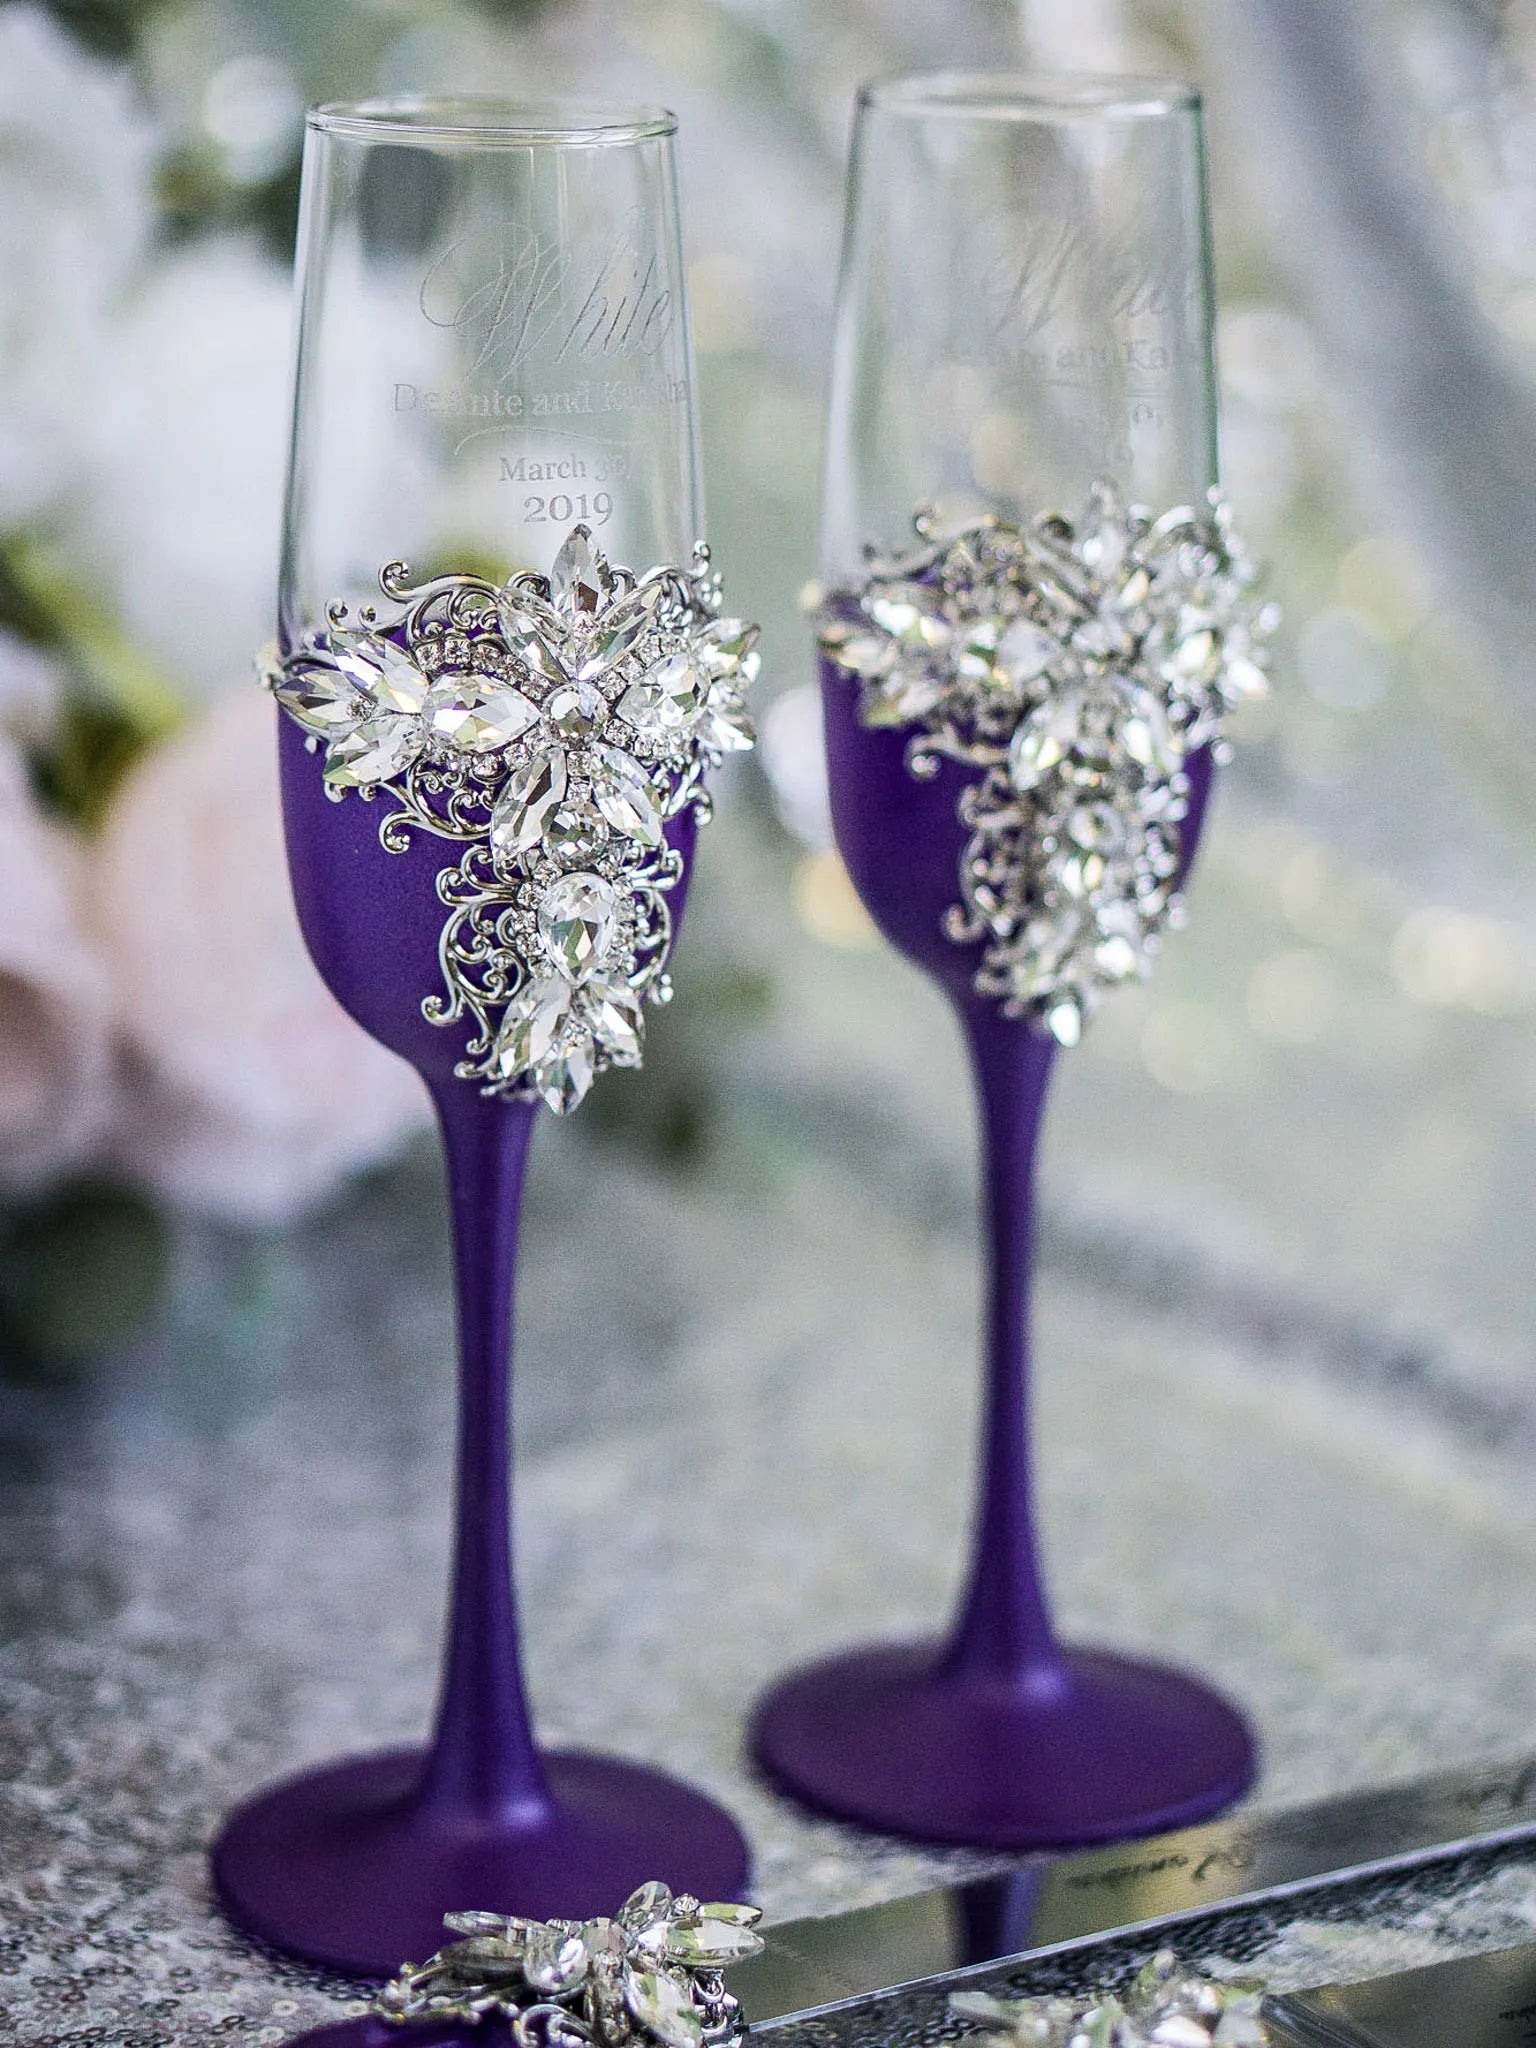 Silver and Plum Purple Wedding Glasses and Cake Cutting Set with Crystals